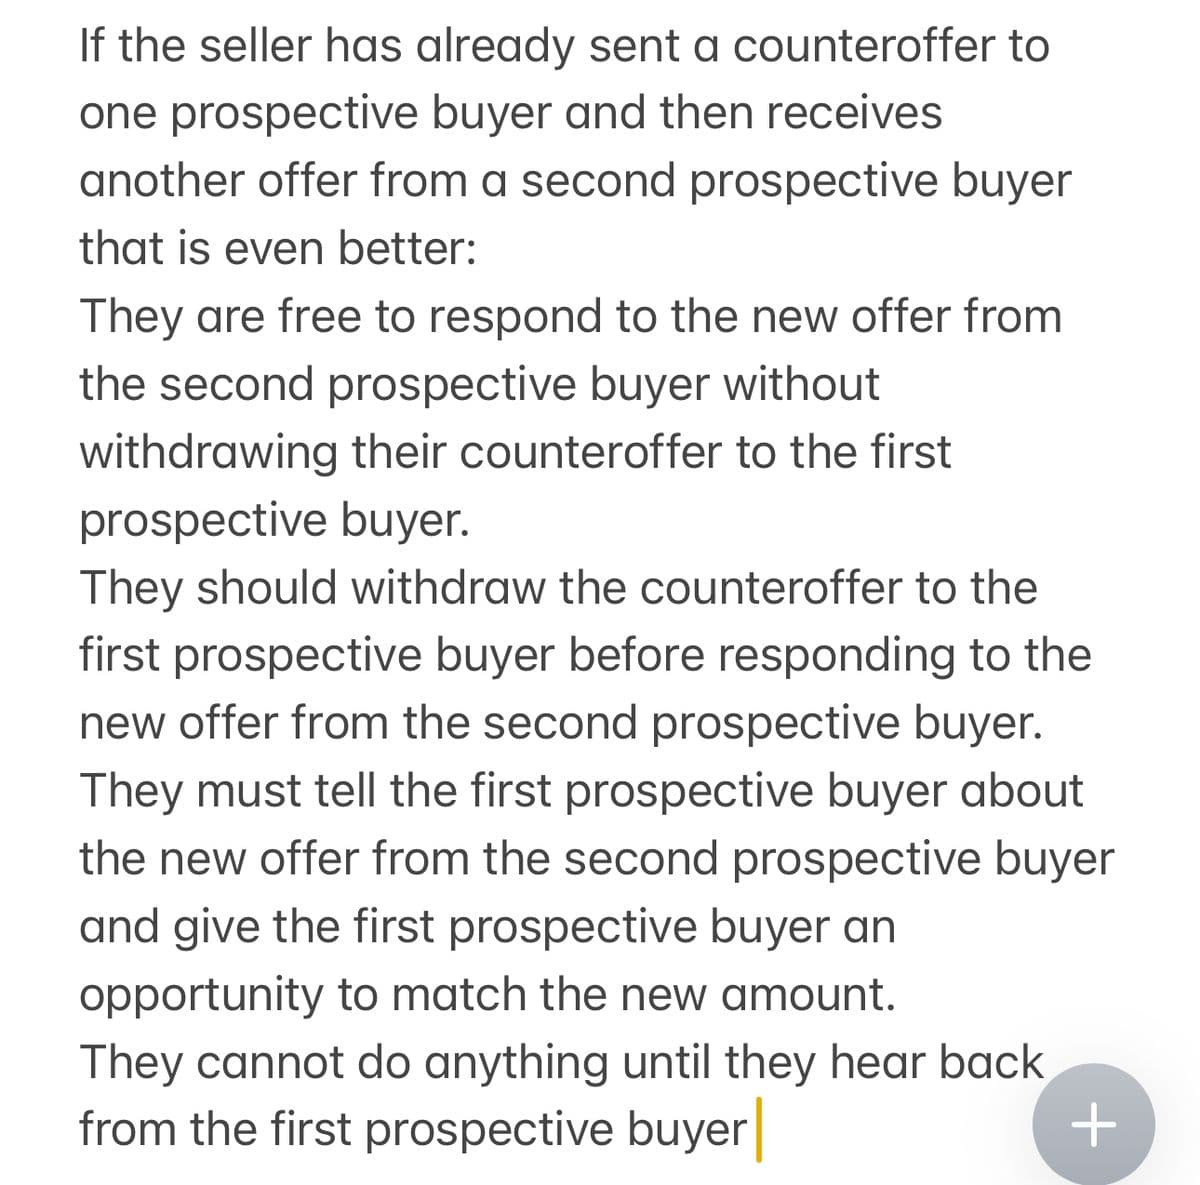 If the seller has already sent a counteroffer to
one prospective buyer and then receives
another offer from a second prospective buyer
that is even better:
They are free to respond to the new offer from
the second prospective buyer without
withdrawing their counteroffer to the first
prospective buyer.
They should withdraw the counteroffer to the
first prospective buyer before responding to the
new offer from the second prospective buyer.
They must tell the first prospective buyer about
the new offer from the second prospective buyer
and give the first prospective buyer an
opportunity to match the new amount.
They cannot do anything until they hear back
from the first prospective buyer
+